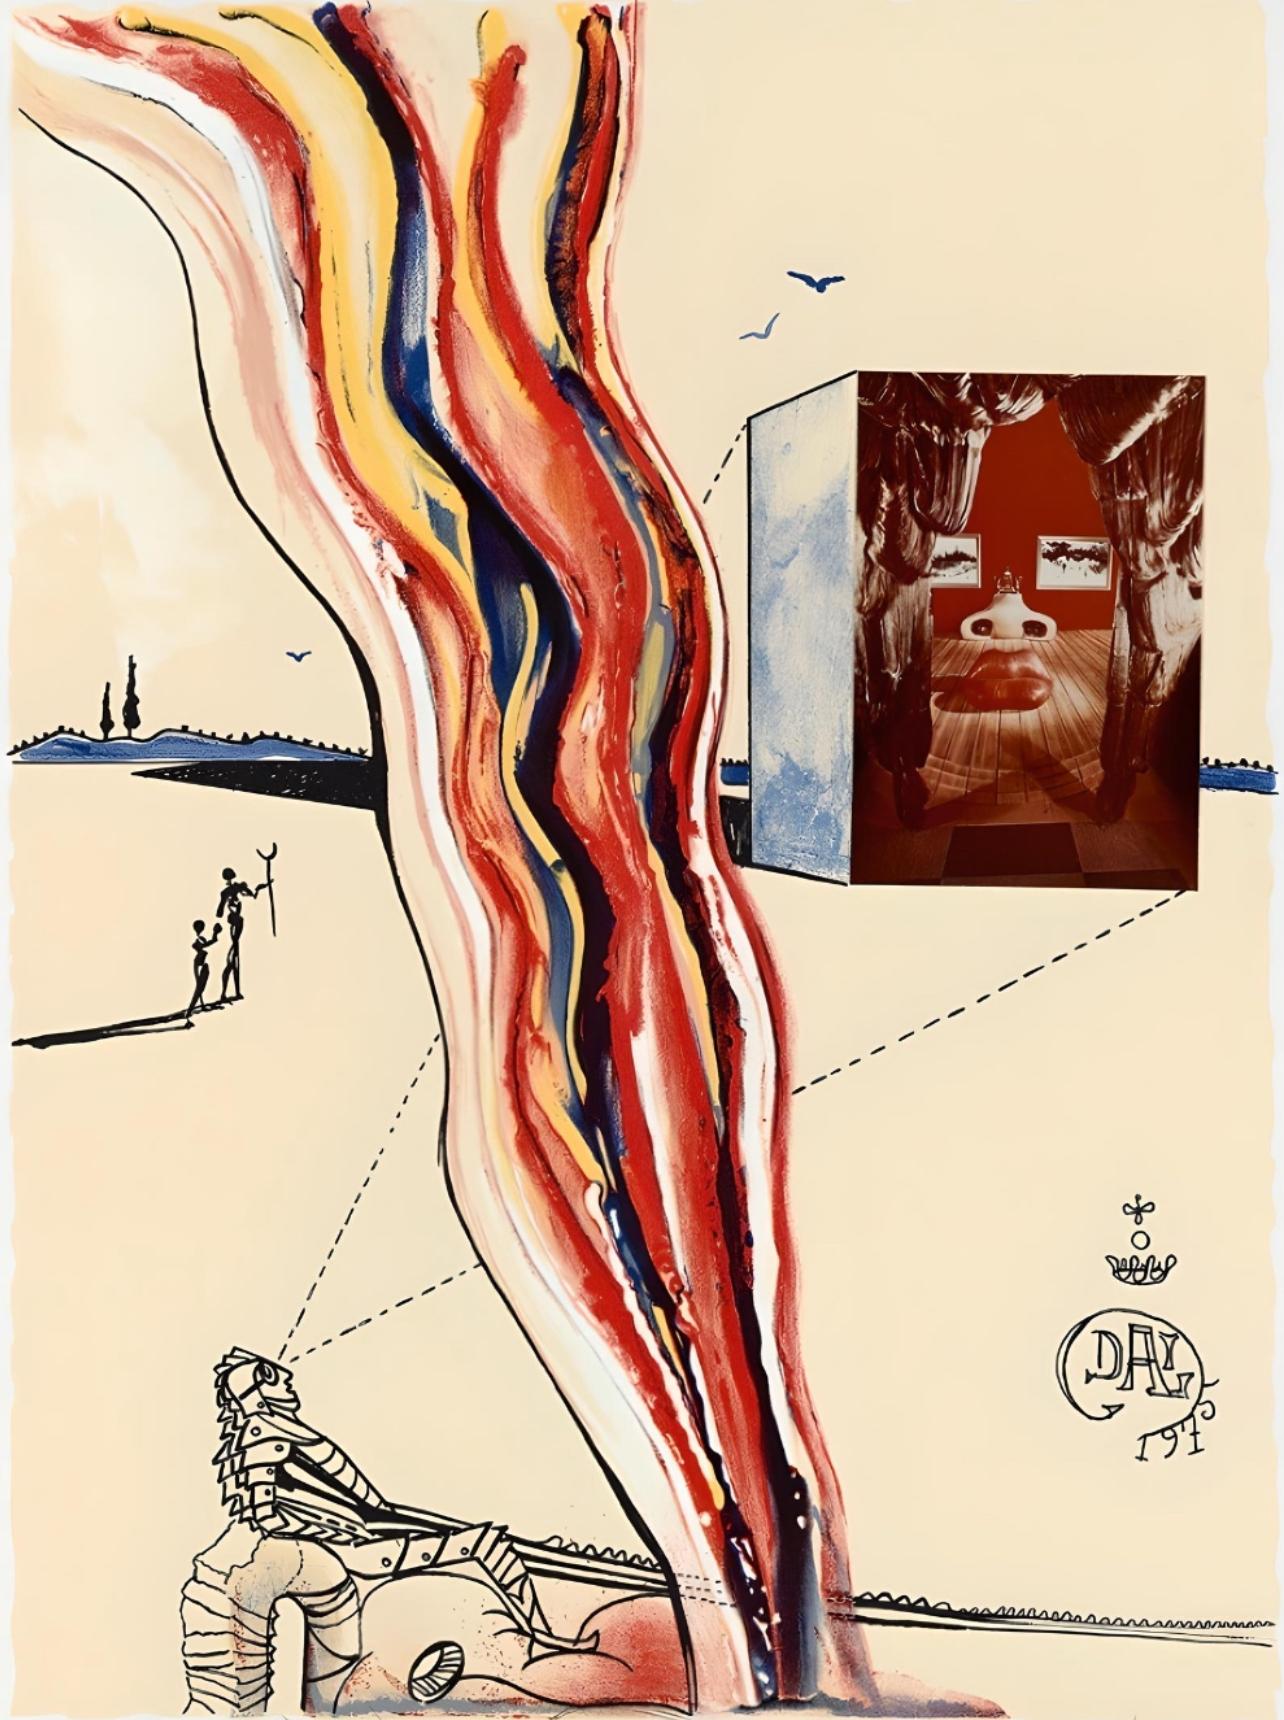 Liquid and Gaseous Television (Michler/Löpsinger 824; Field 75-11C), S. Dali - Print by Salvador Dalí